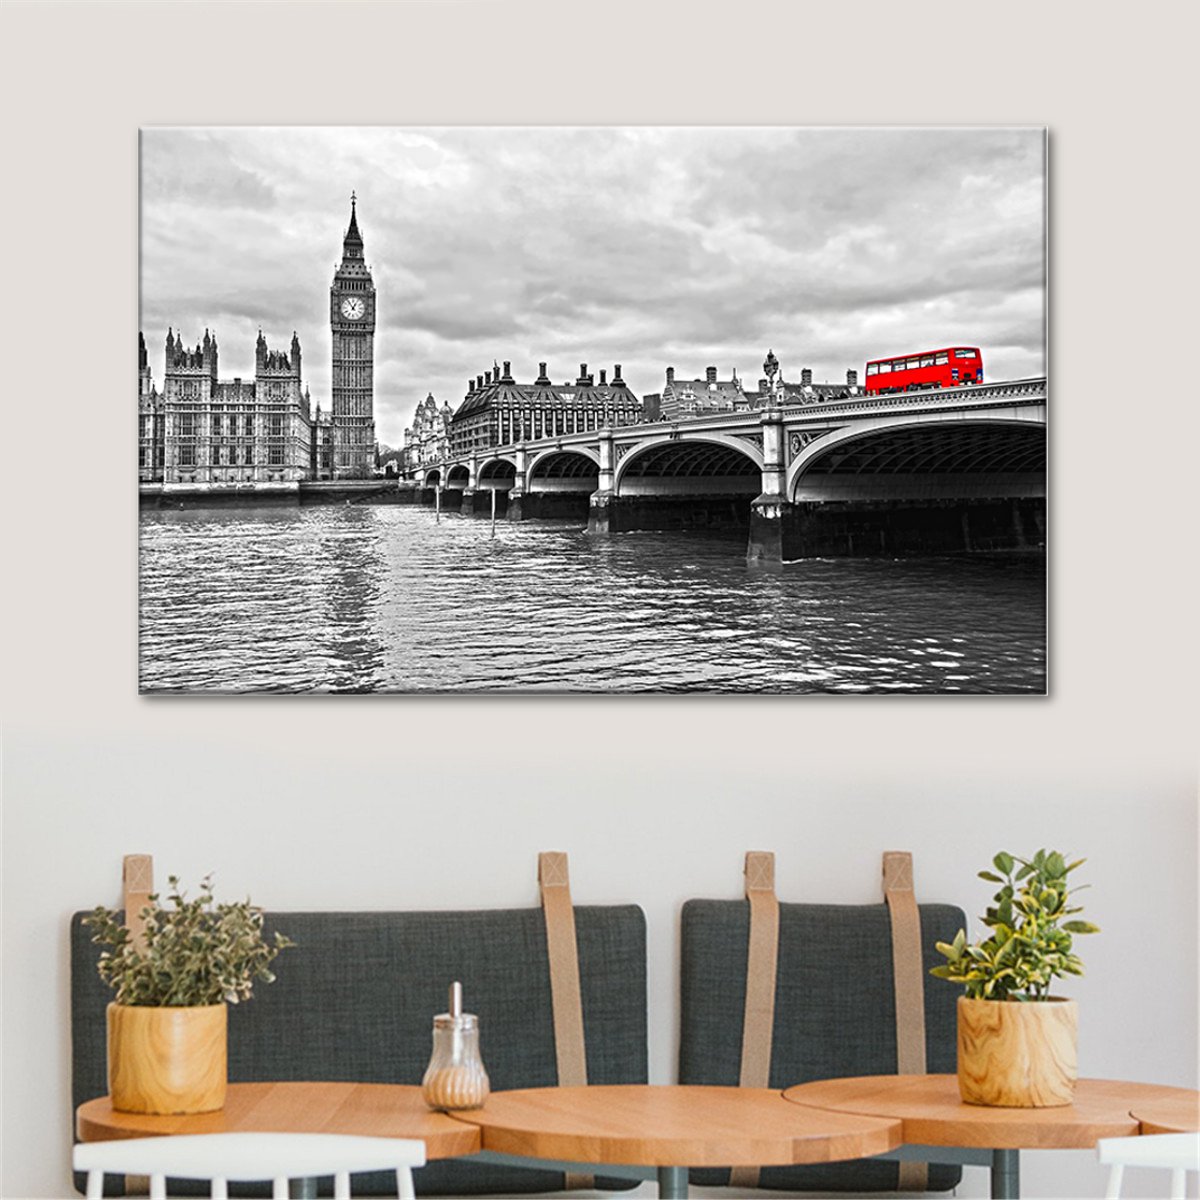 City-Modern-Canvas-London-Scenery-Print-Paintings-Wall-Art-Picture-Decor-Unframed-1426658